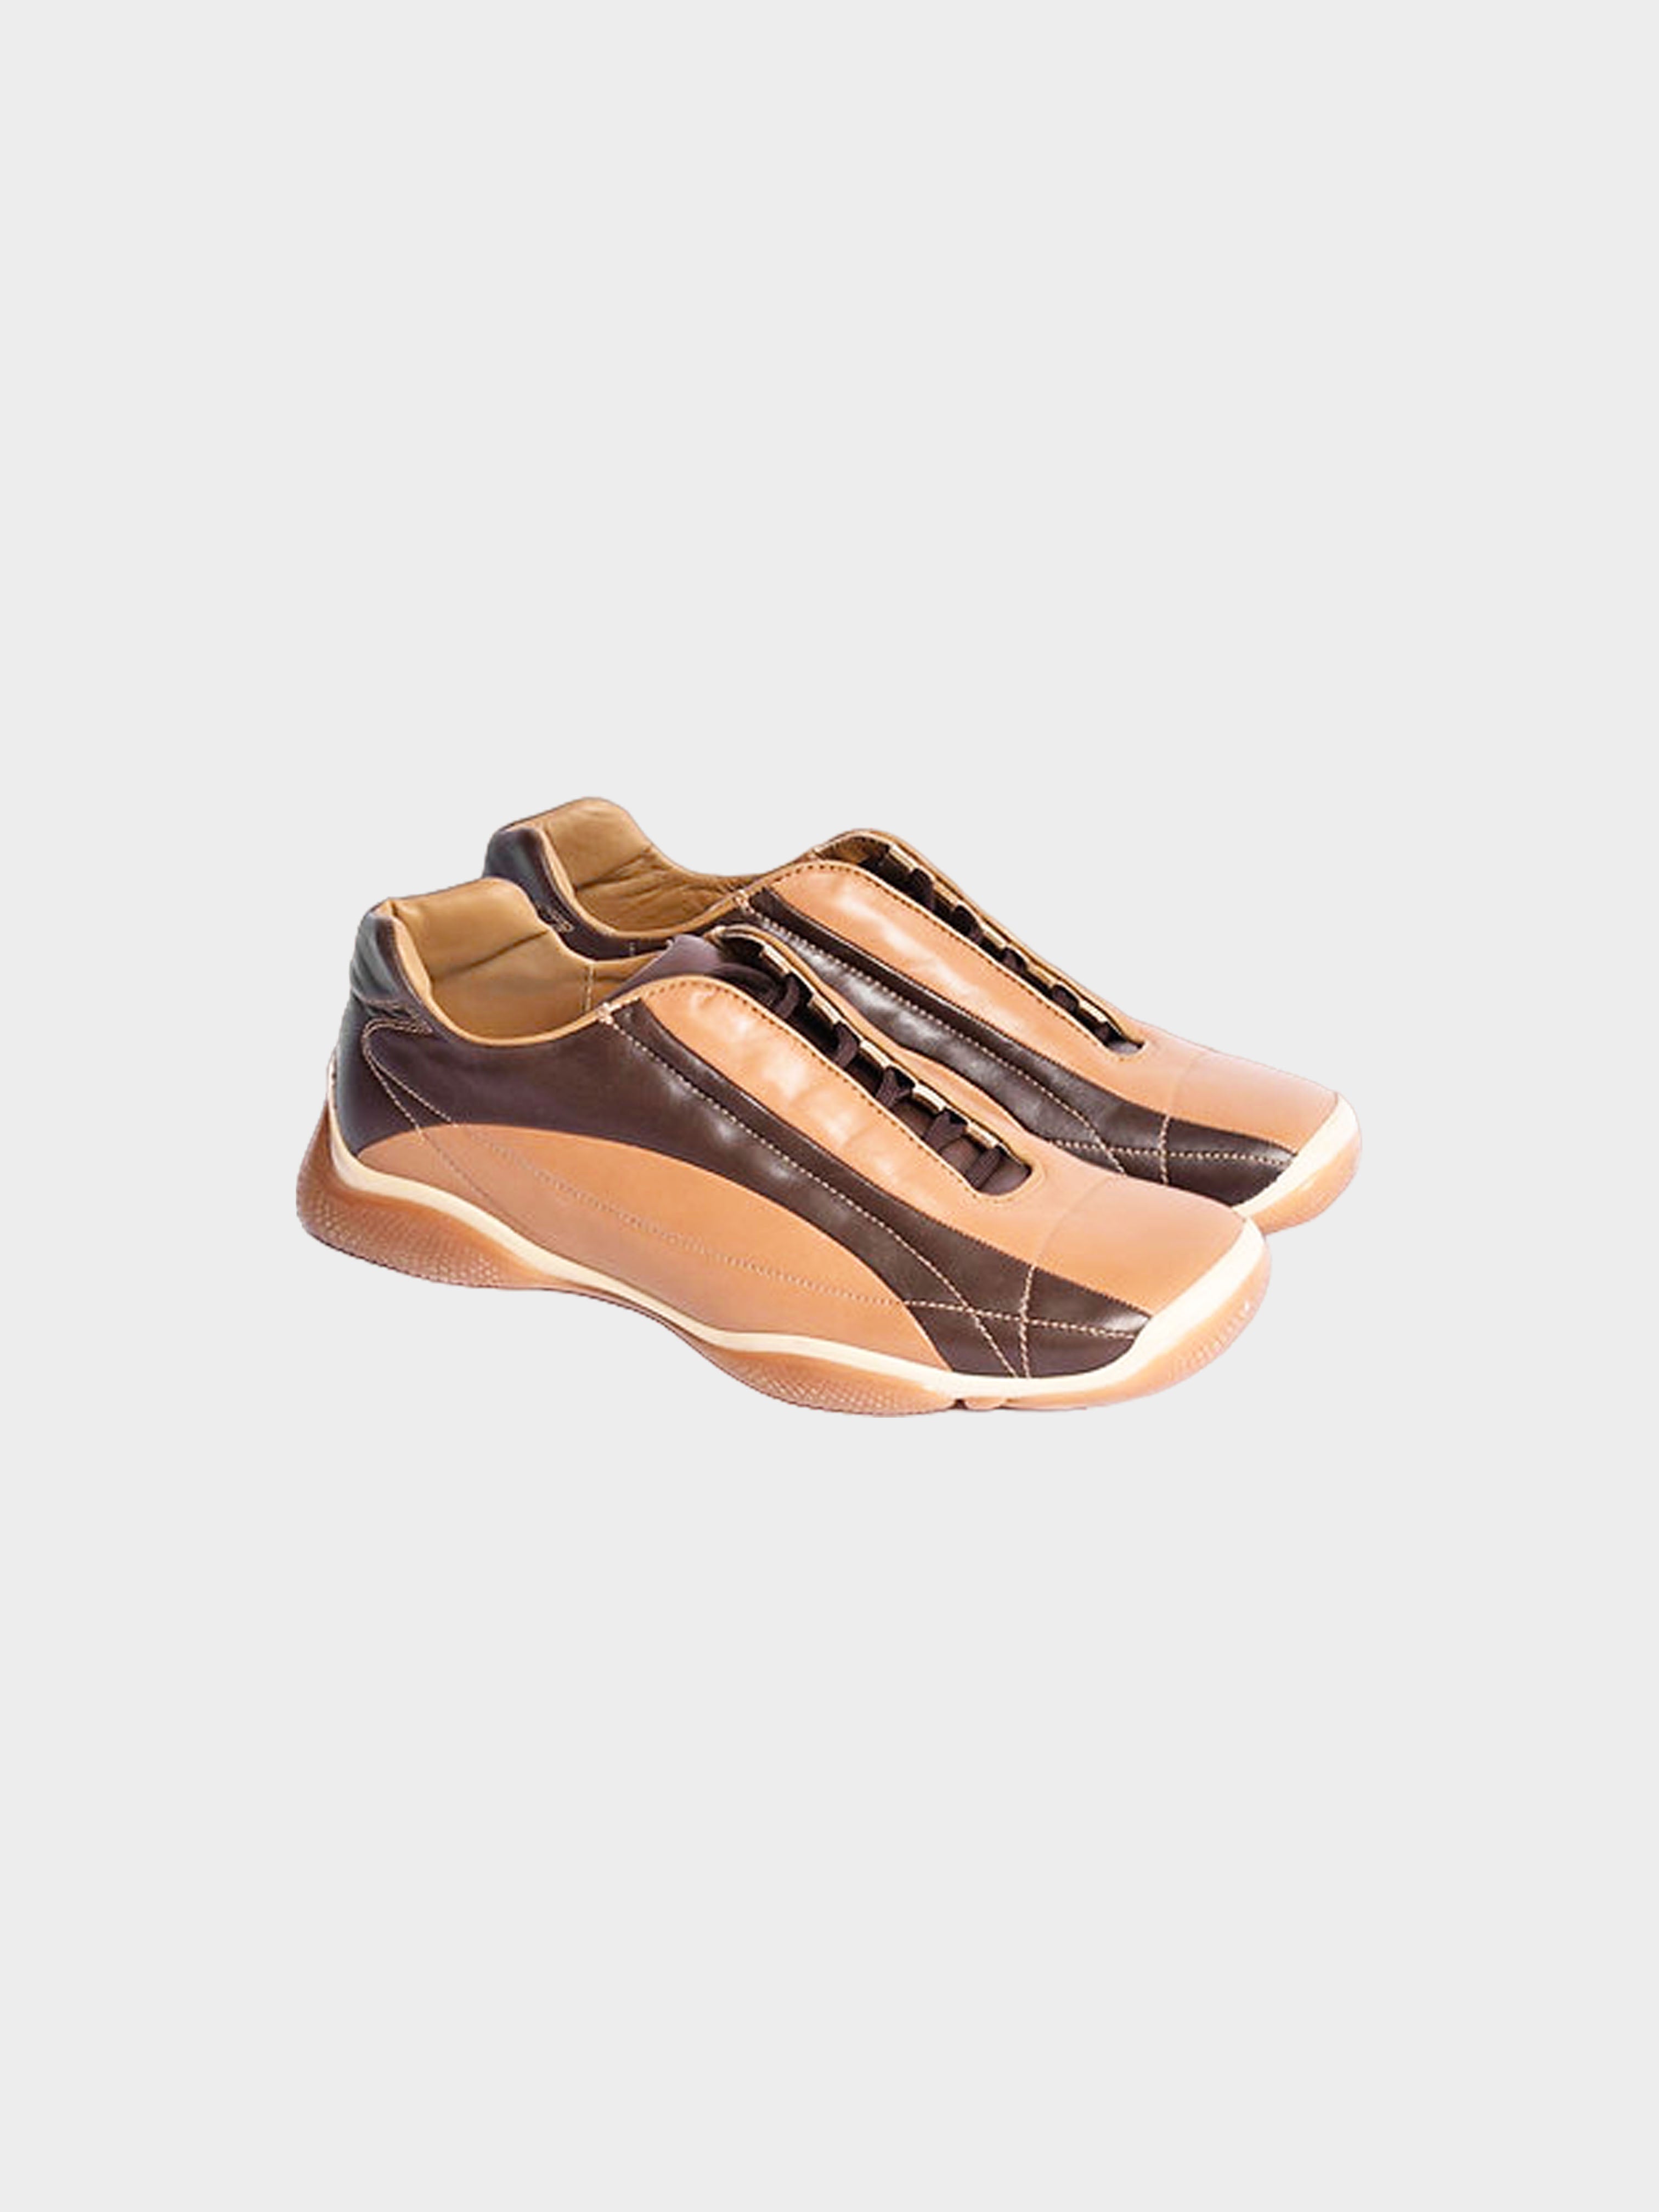 Prada Sport 2001 Brown and Nude Leather Sneakers